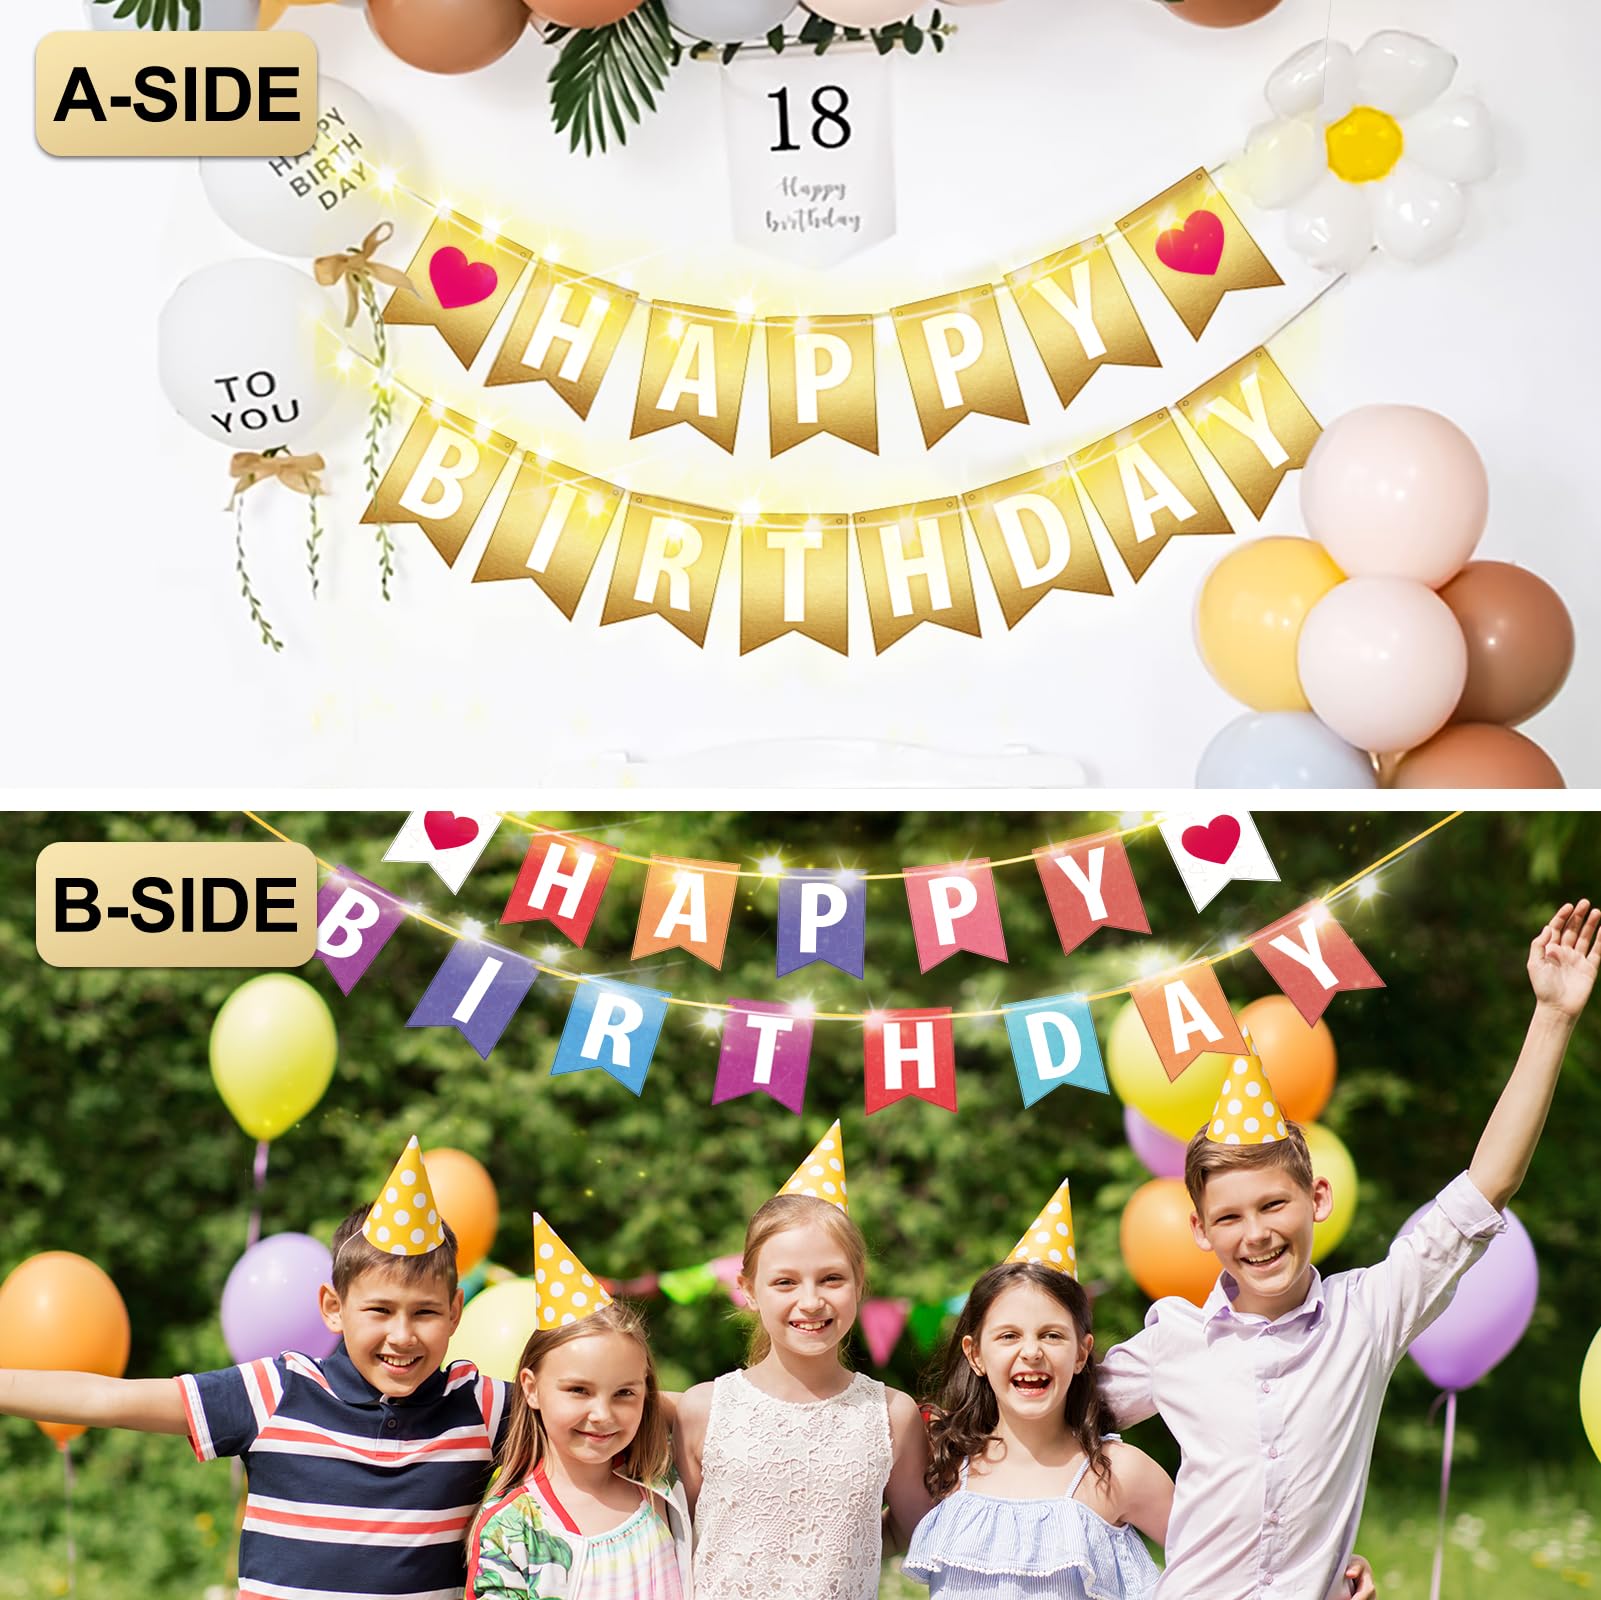 HXWEIYE Happy Birthday Banner Sign, Double Sided Birthday Banner Garland for Men Boys Baby Shower Backdrop Kids Party Supplies, Bunting Party Decorations(Colorful & Gold)